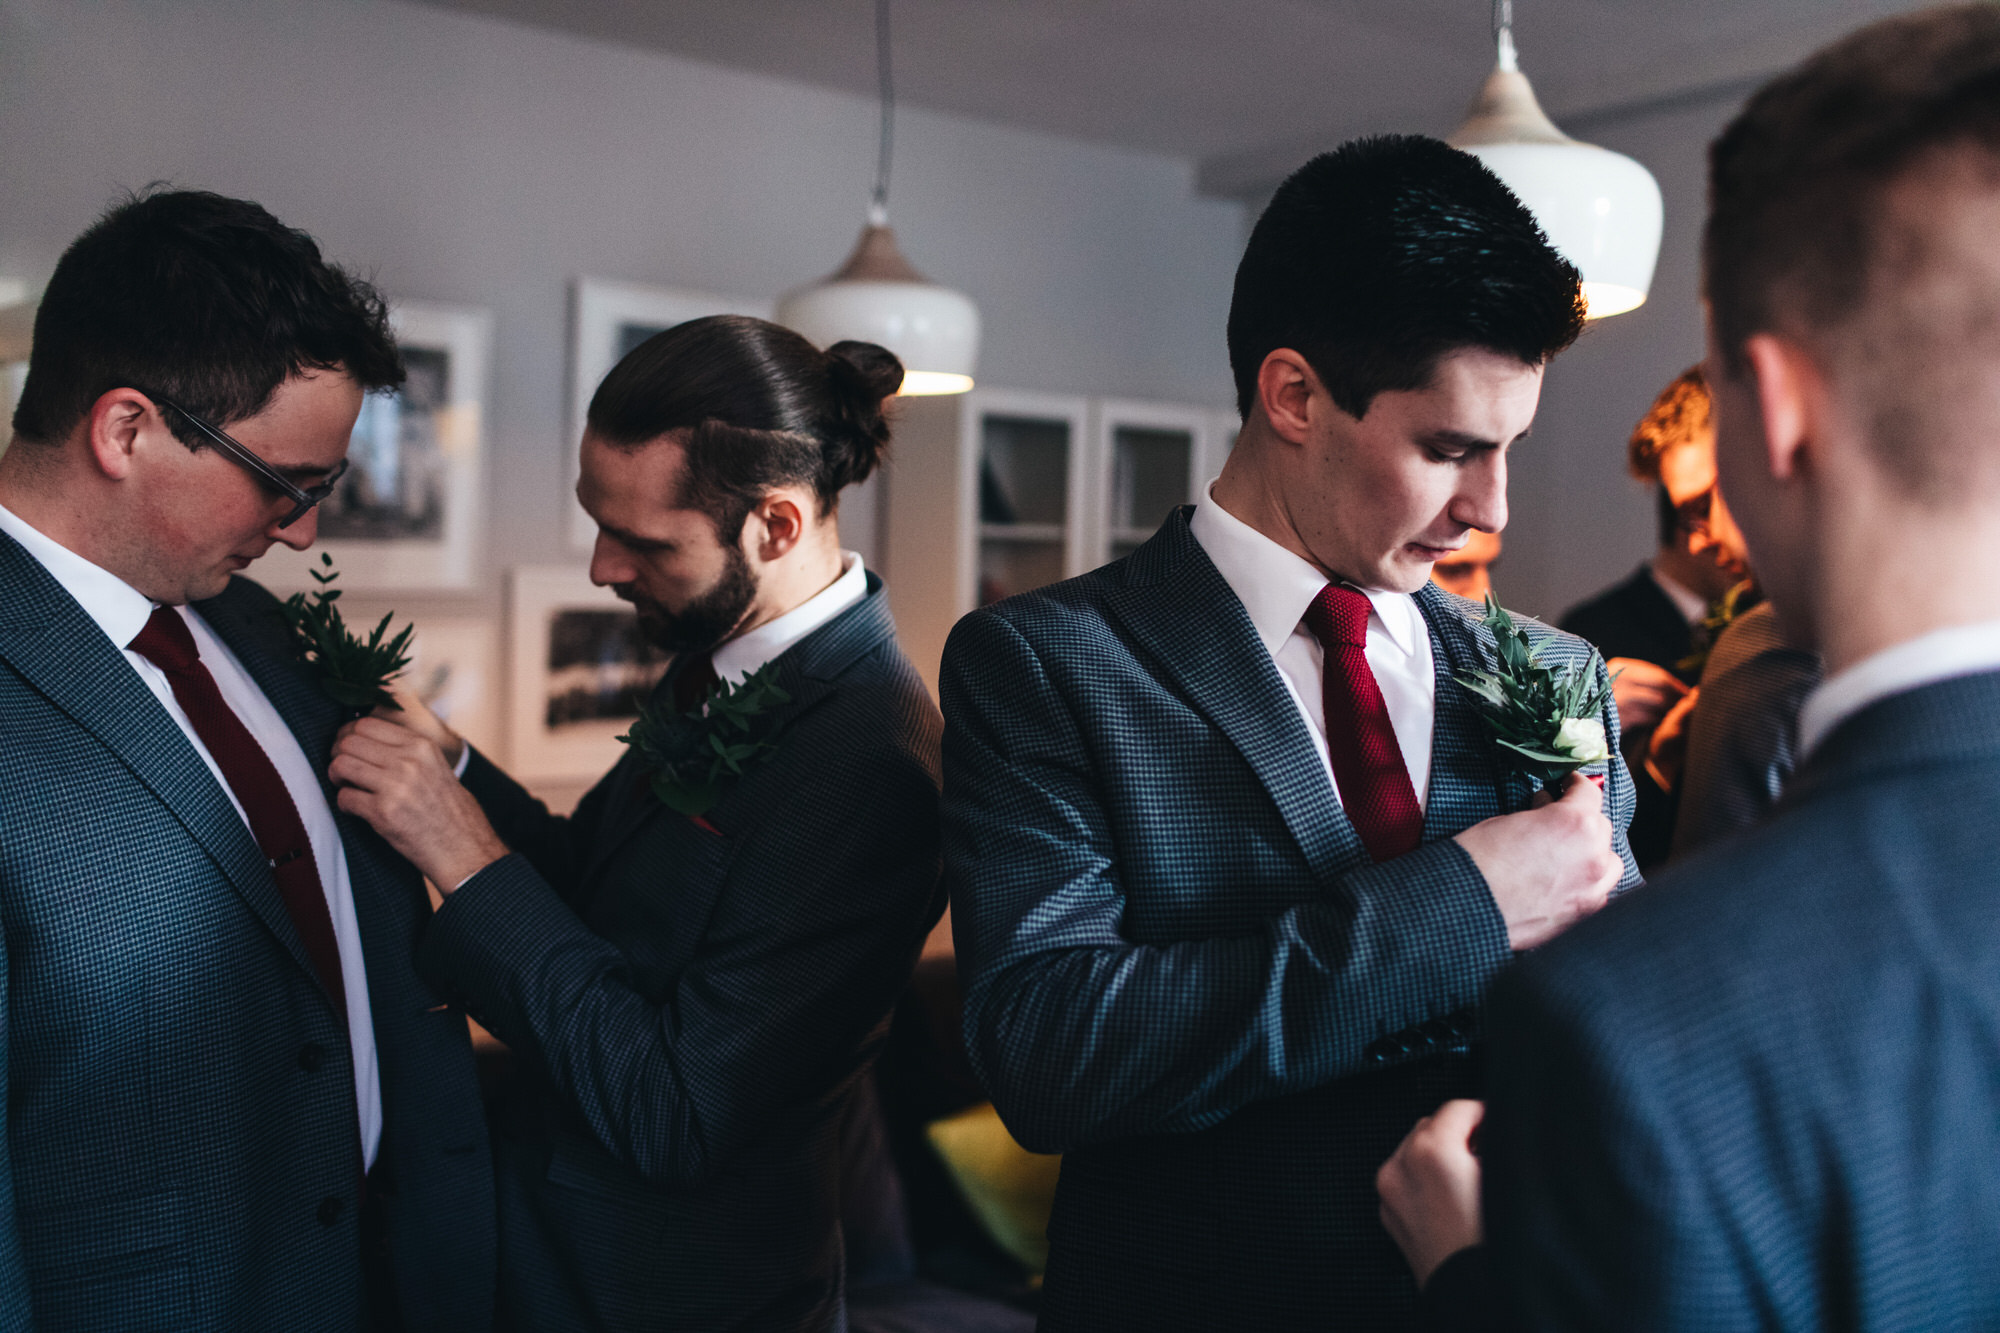 men putting on button holes before wedding